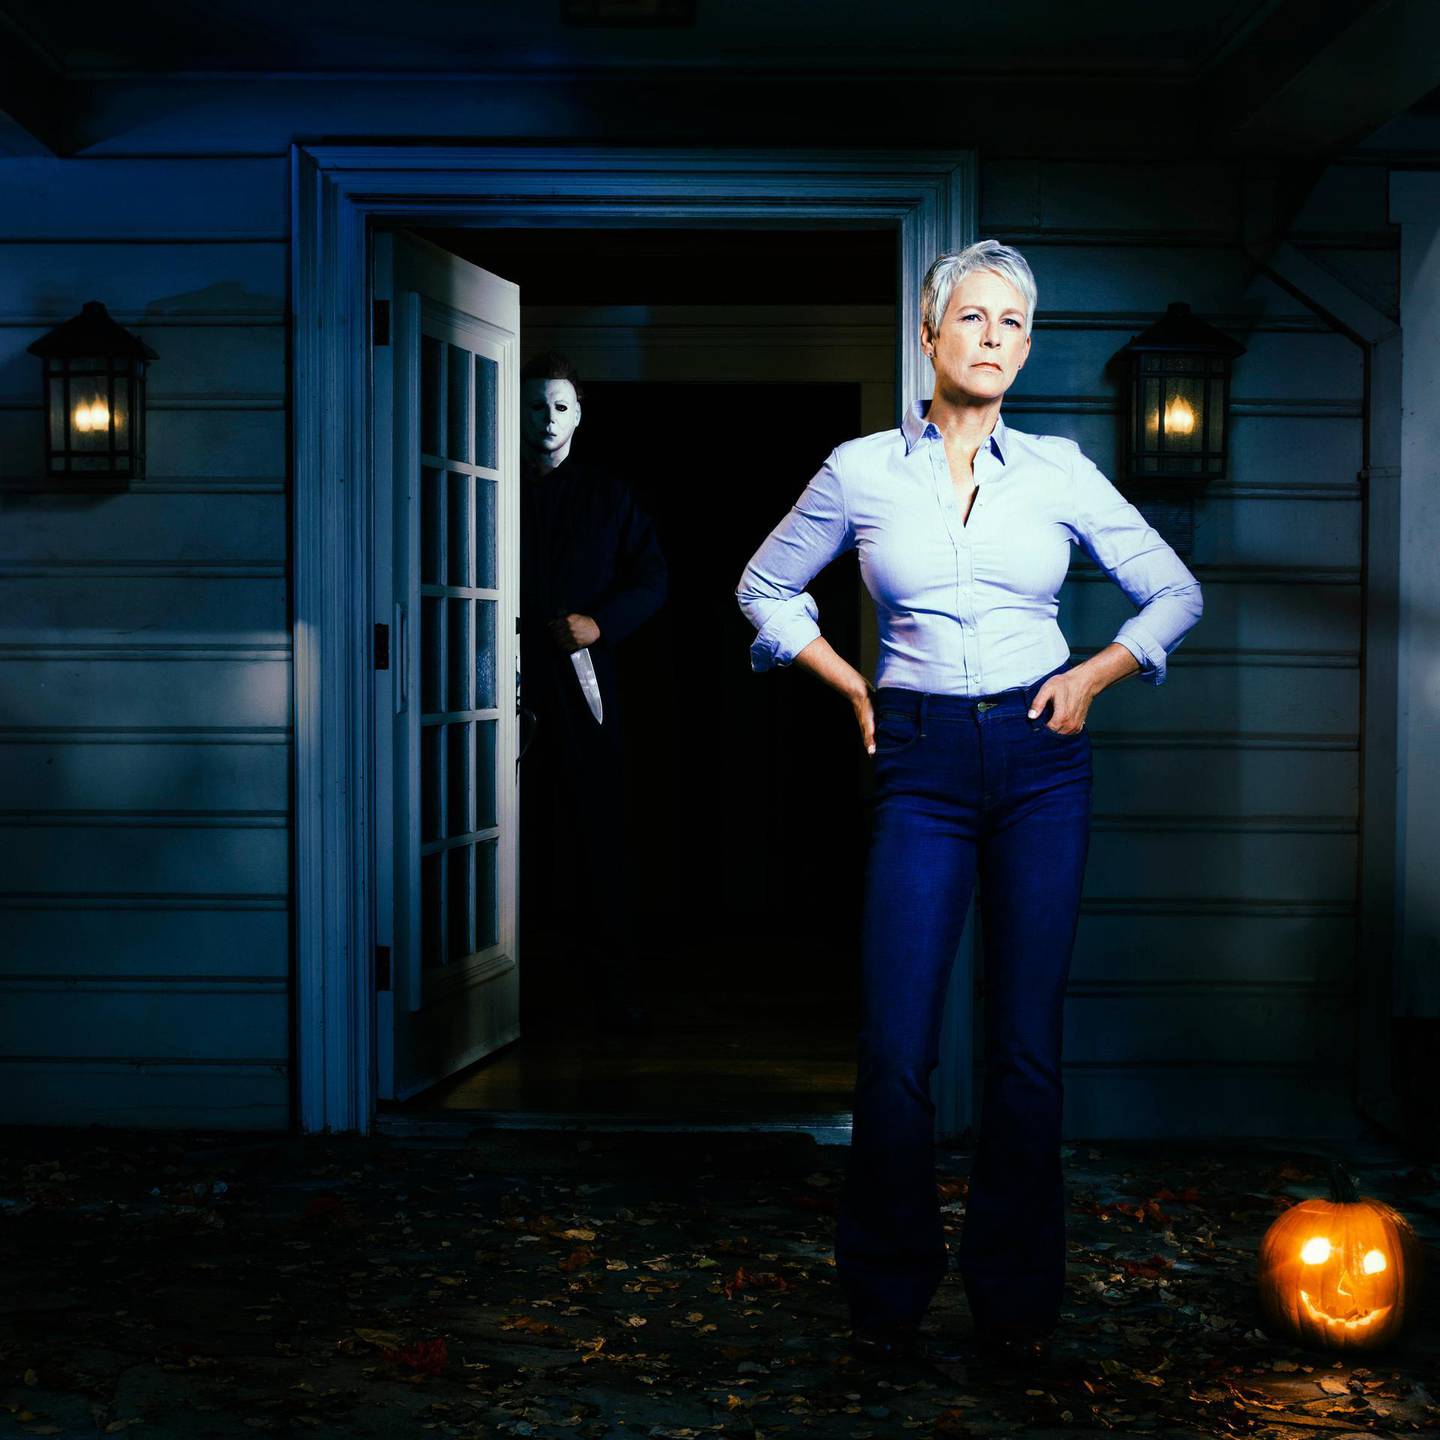 Jamie Lee Curtis returns to her iconic role as Laurie Strode in 'Hallo...